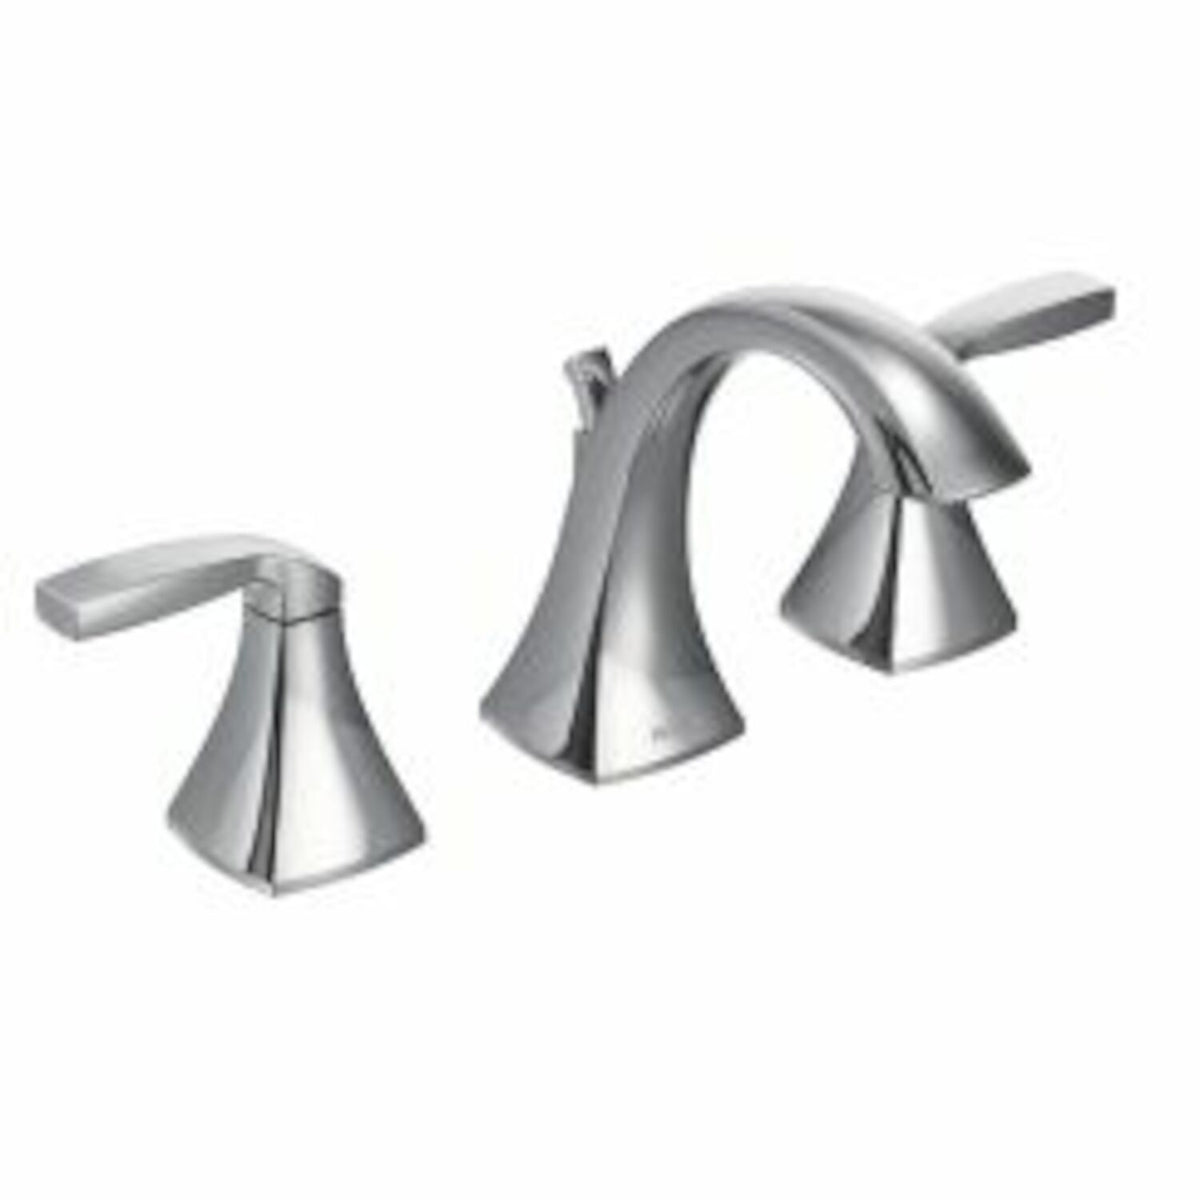 VOSS TWO-HANDLE HIGH ARC BATHROOM FAUCET